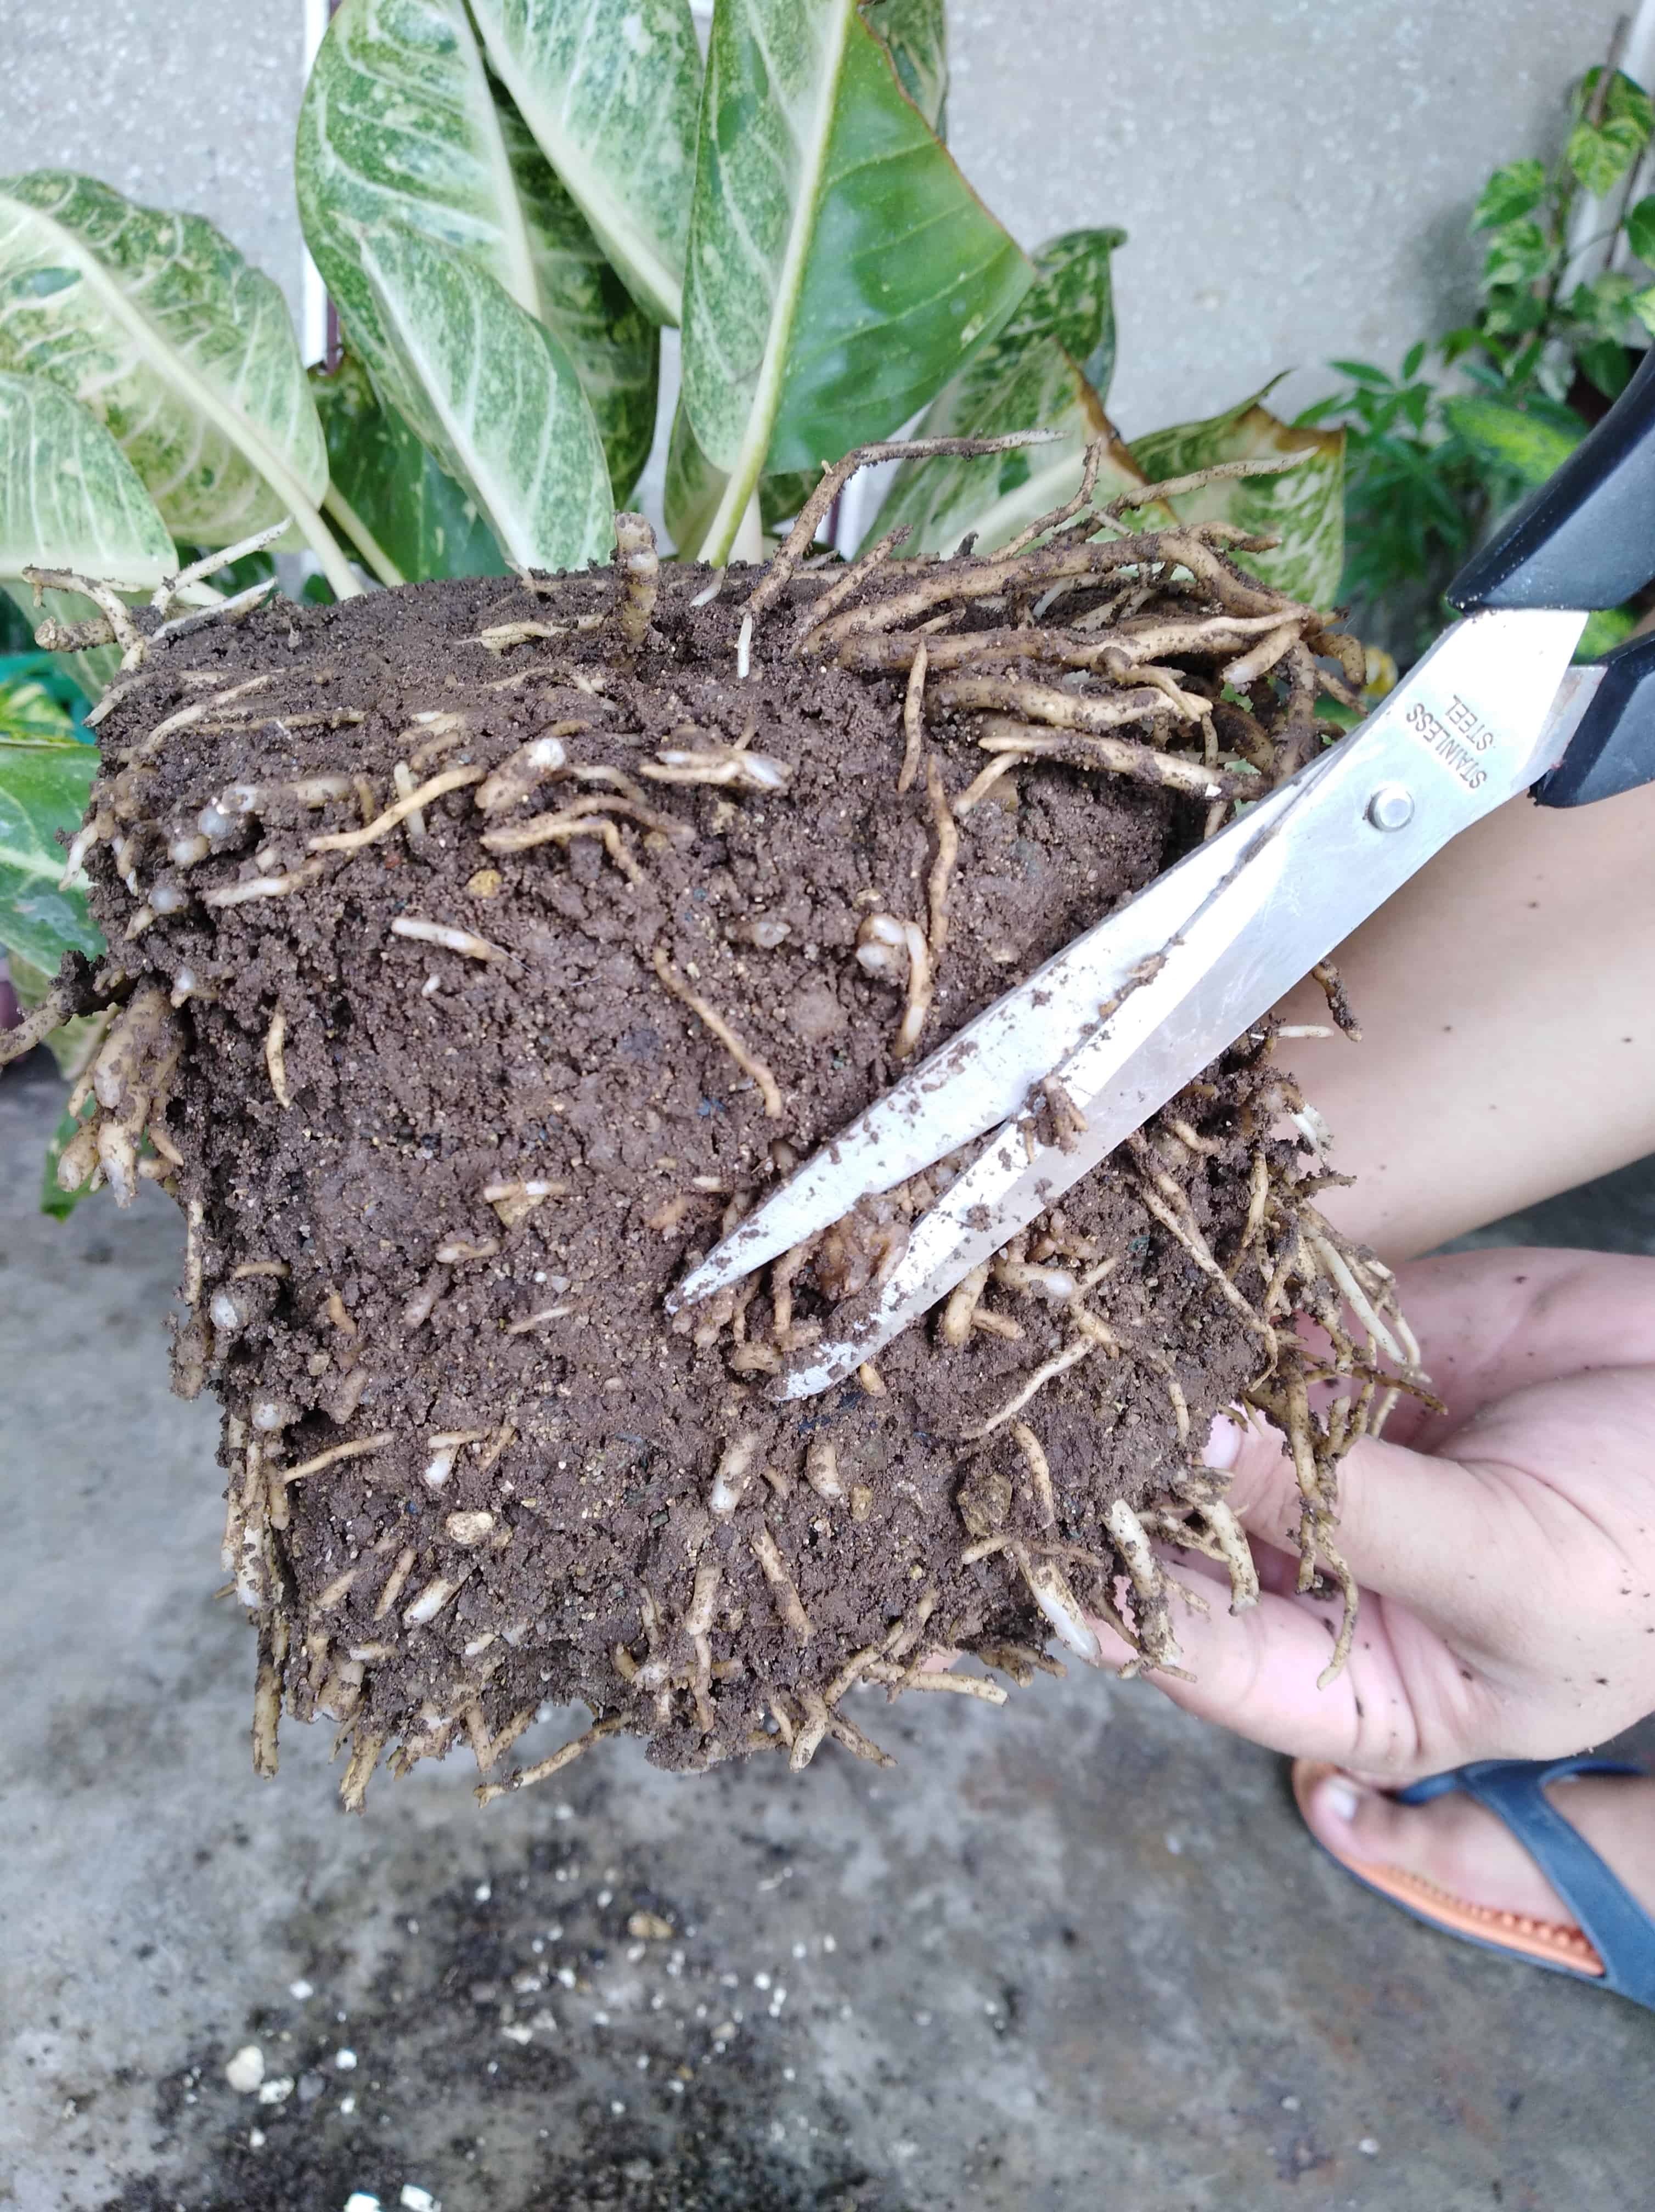 Trimming off the dense bottom layer of roots.